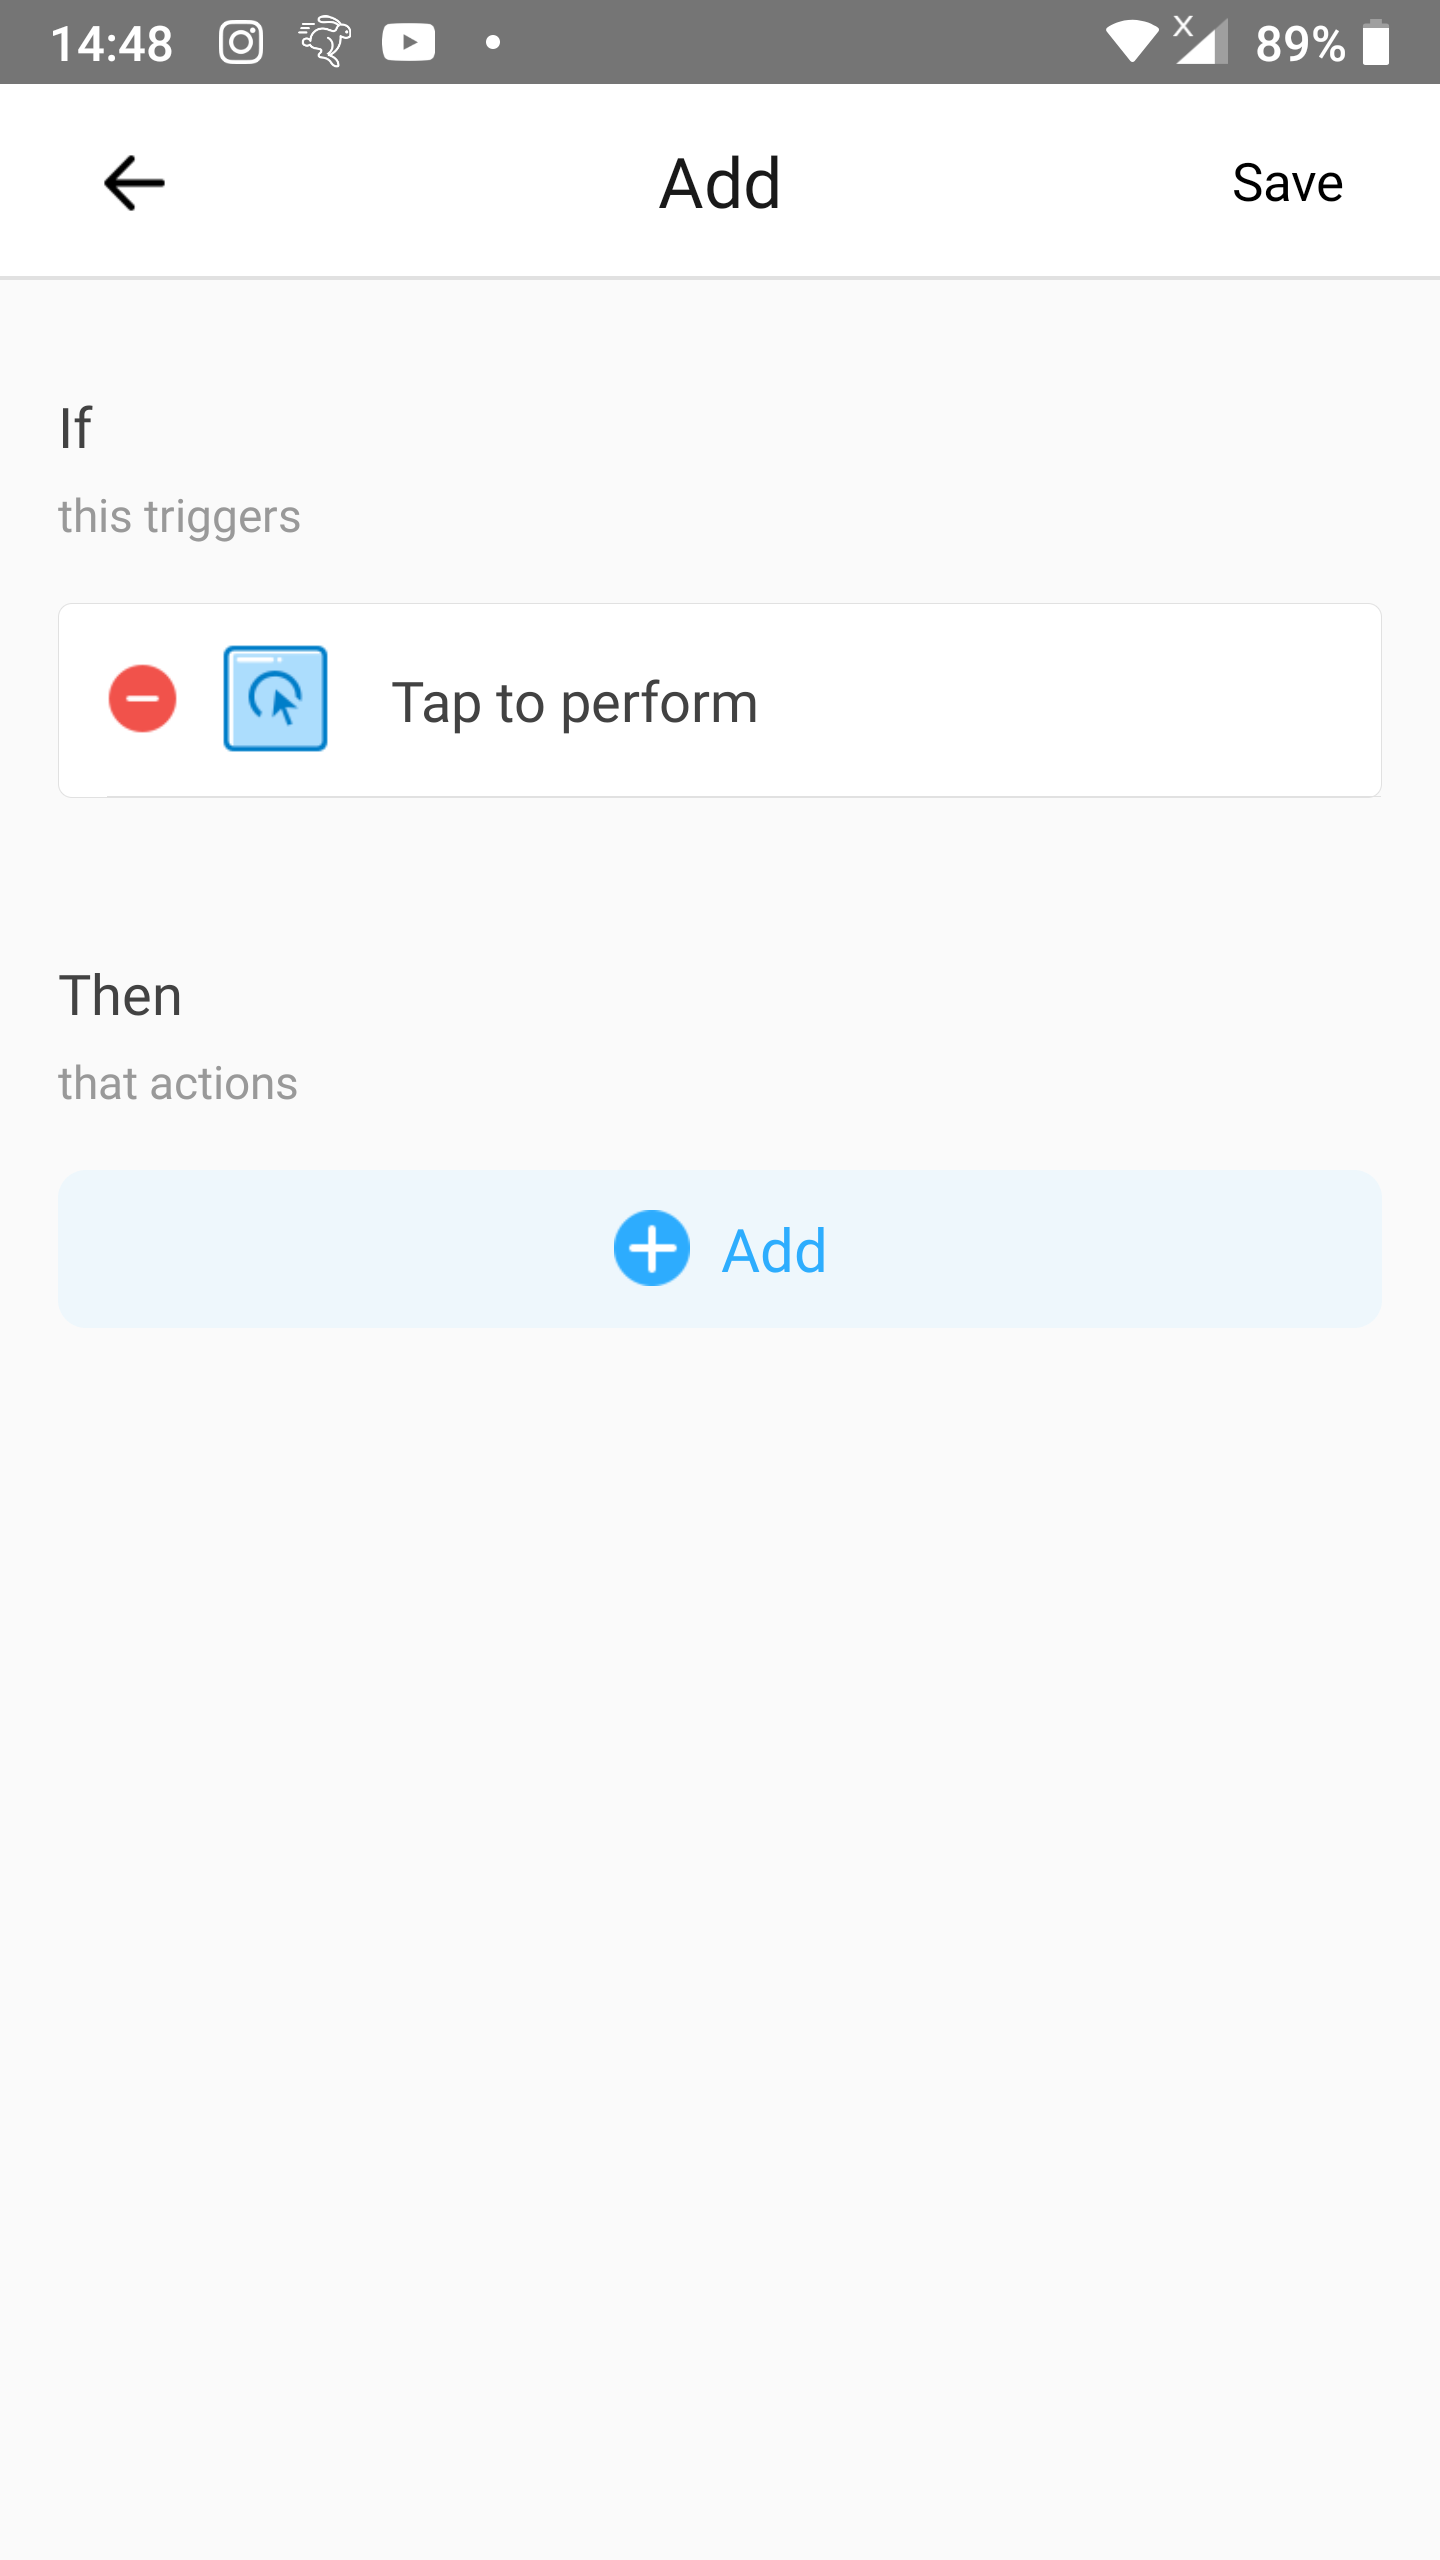 KB: 1-button toggle: Tap-to-perform trigger added to new scene